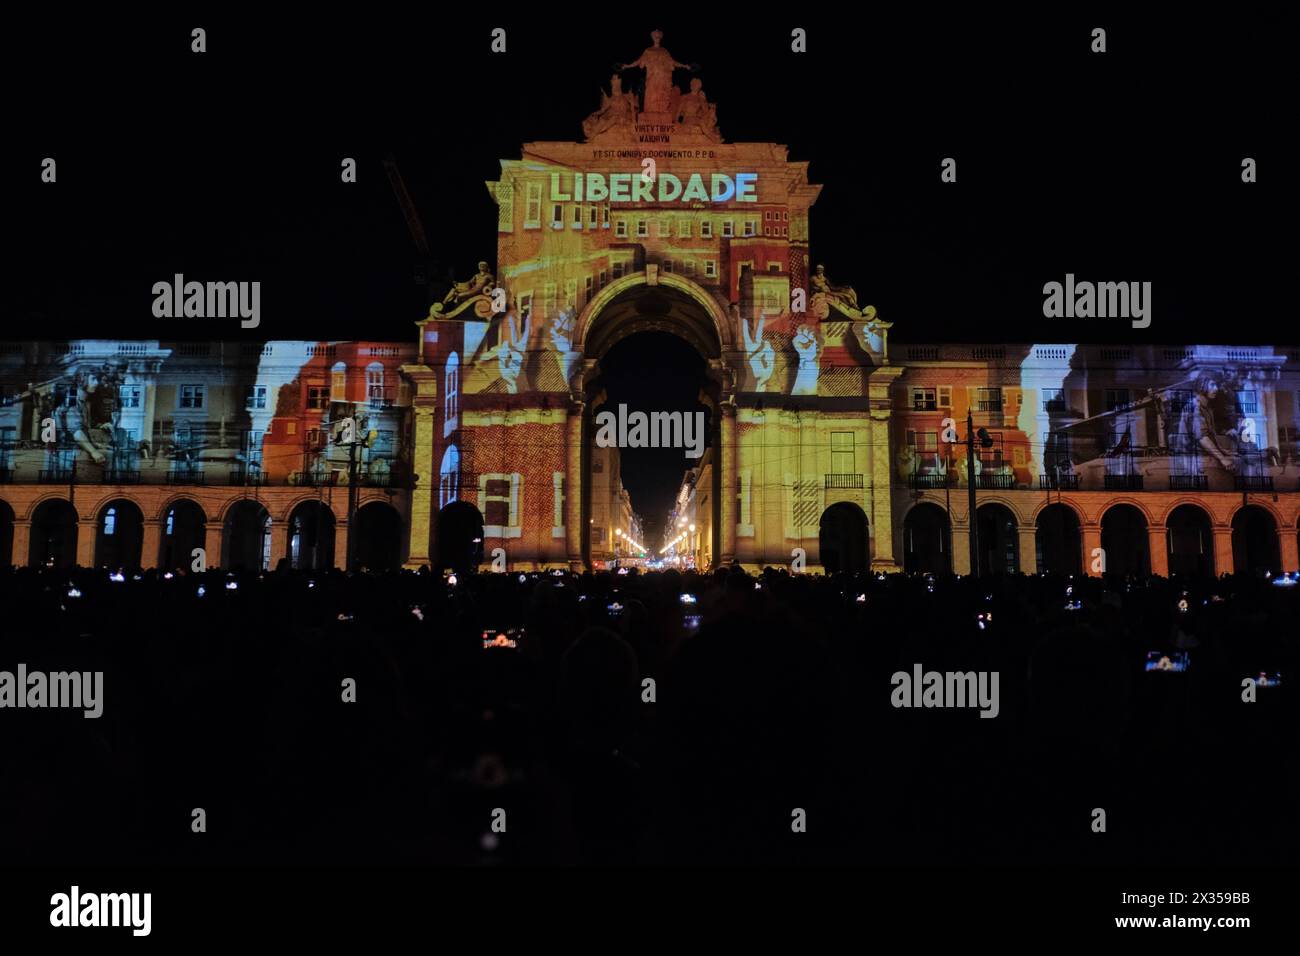 RECORD DATE NOT STATED 50 years of the Carnation Revolution videomapping concert in Lisbon In a vibrant display of color and sound, the spectacle Uma Ideia de Futuro lights up the city square of Terreiro do Paco in Lisbon. This videomapping show, featuring photographs by Alfredo Cunha and music by Rodrigo Leao, transforms the facades of the city into a canvas of light and color. Following the multimedia exhibition, the stage welcomes the Orquestra Sinfonietta de Lisboa, the Coro de Santo Amaro de Oeiras, the Coro da Escola Artistica do Instituto Gregoriano de Lisboa, and various soloists. Thes Stock Photo